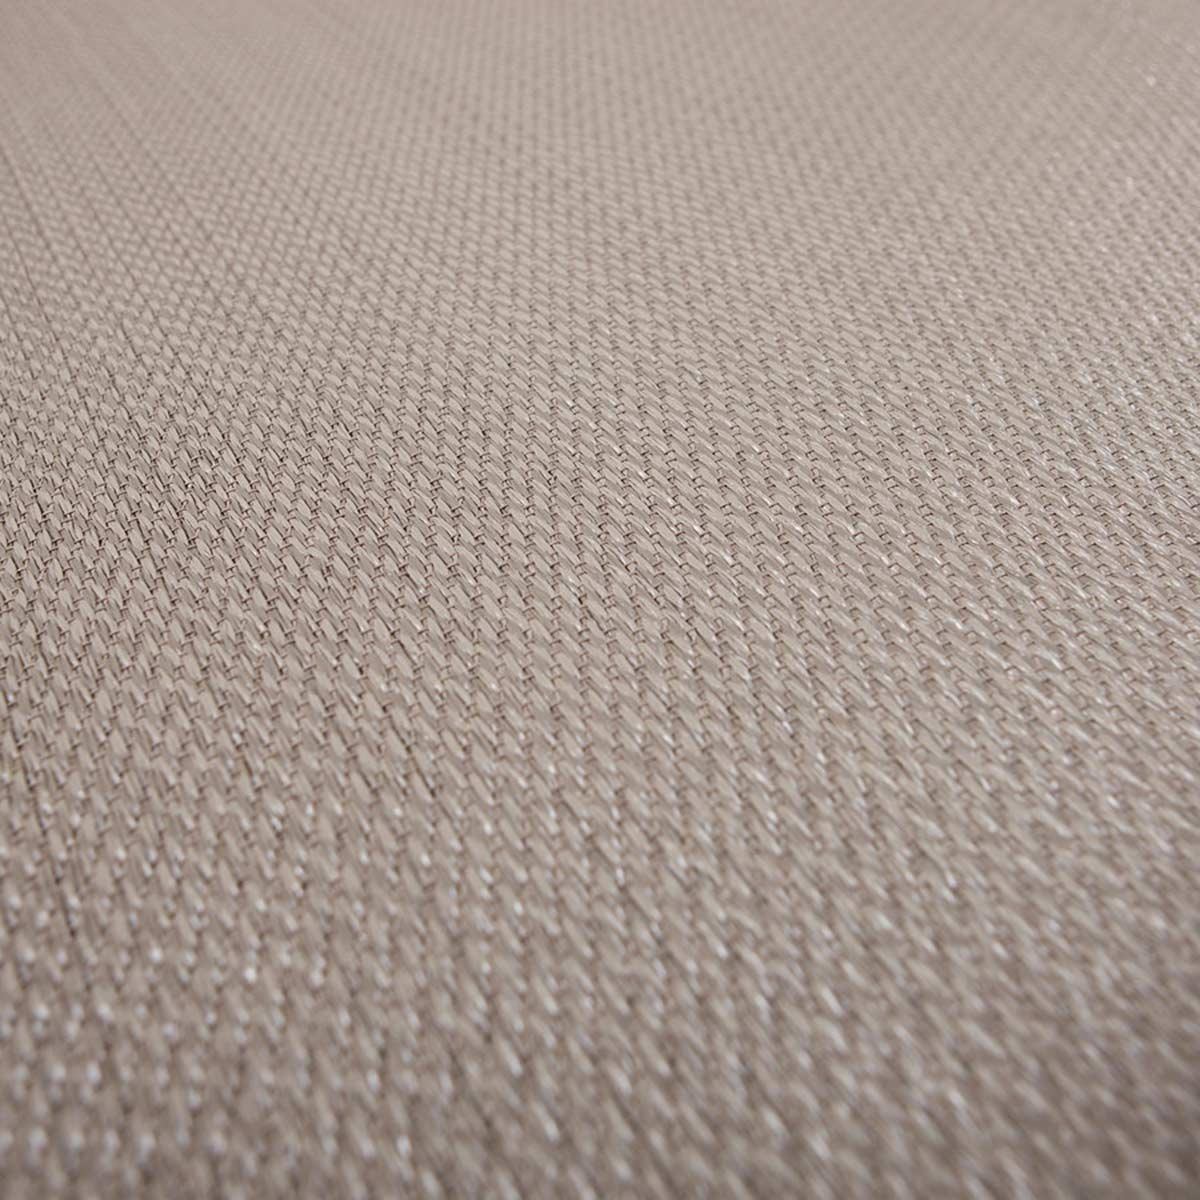 Form of woven sisal fabric: plain weave